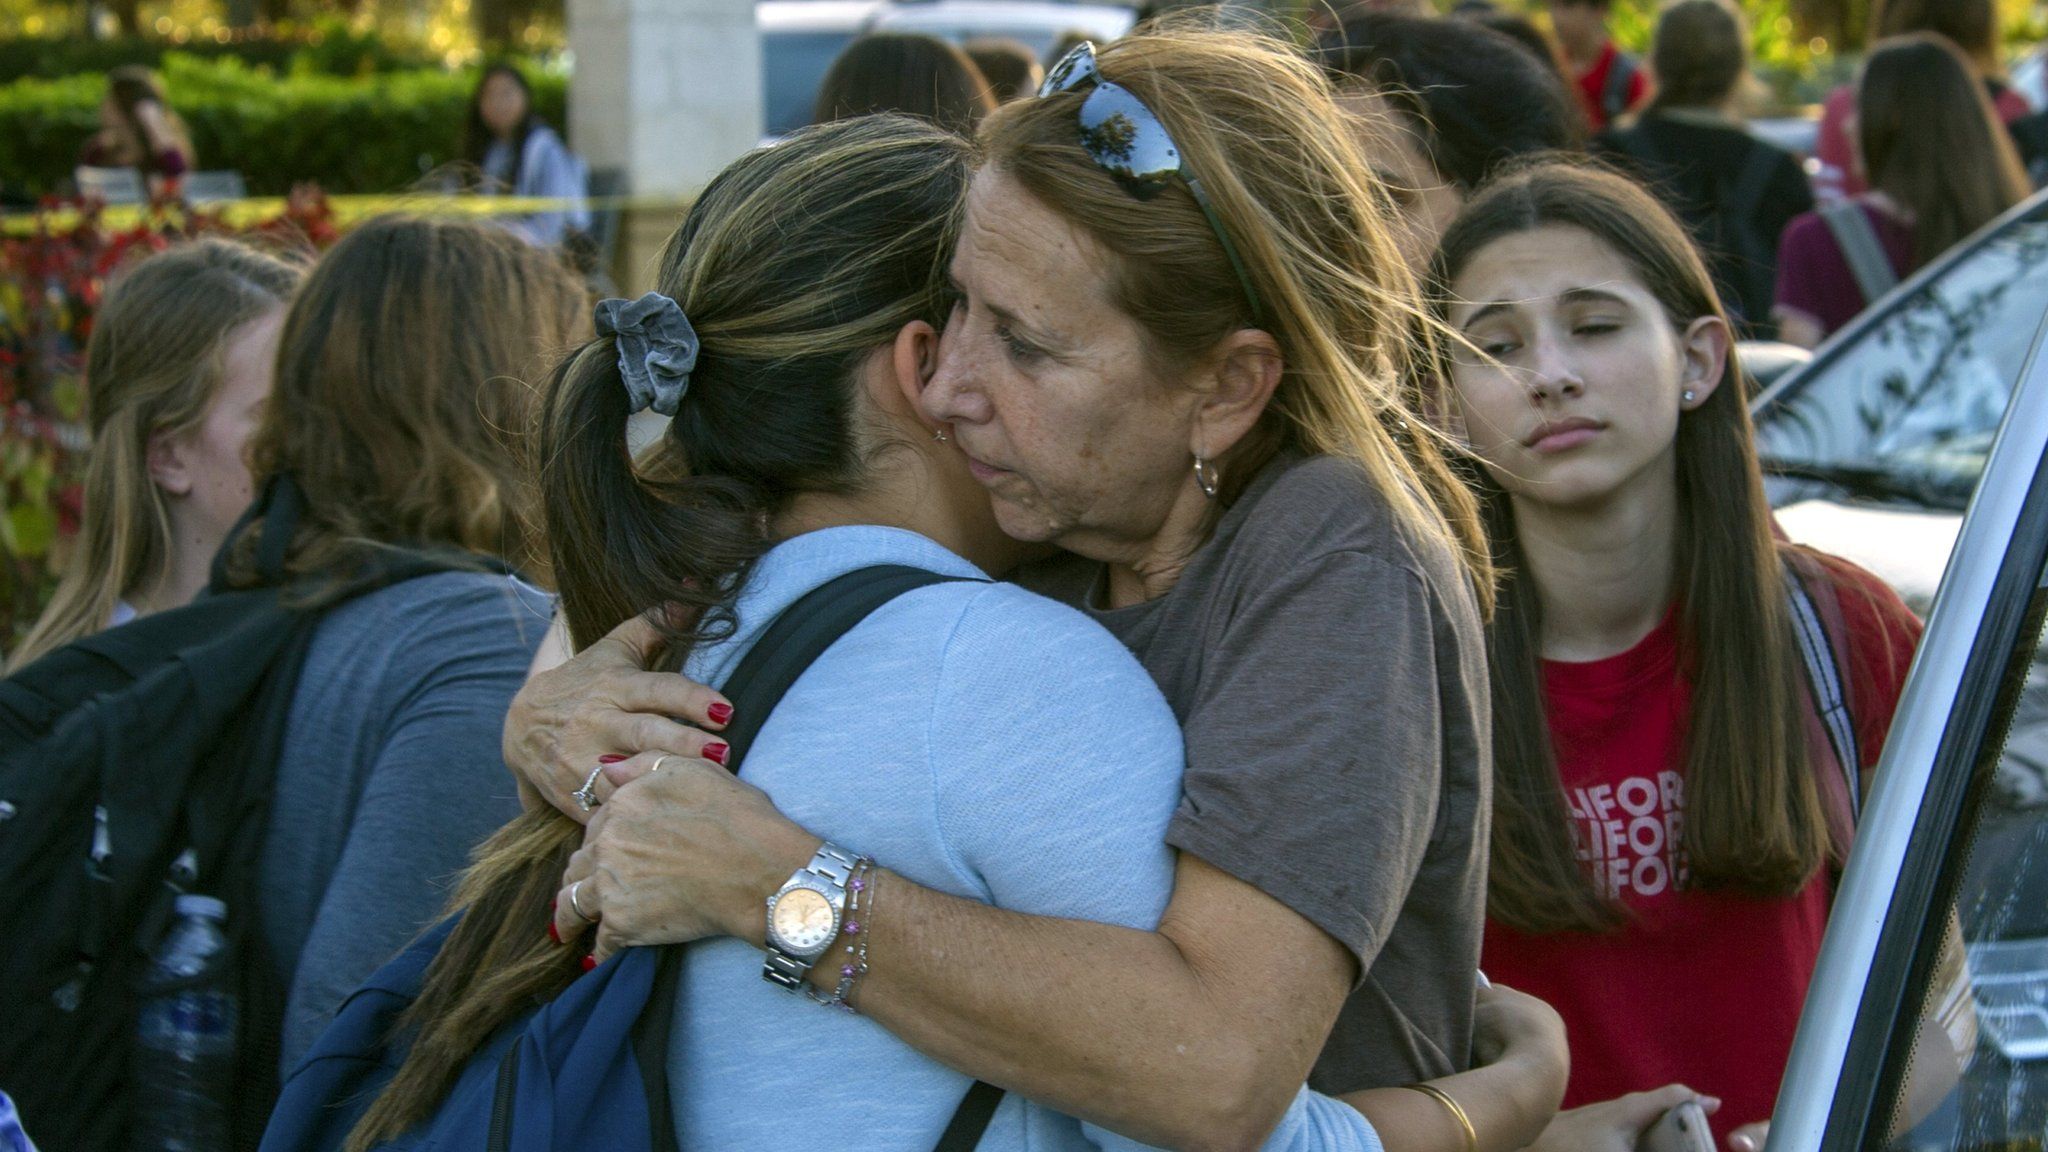 Students reunited with family after the shooting